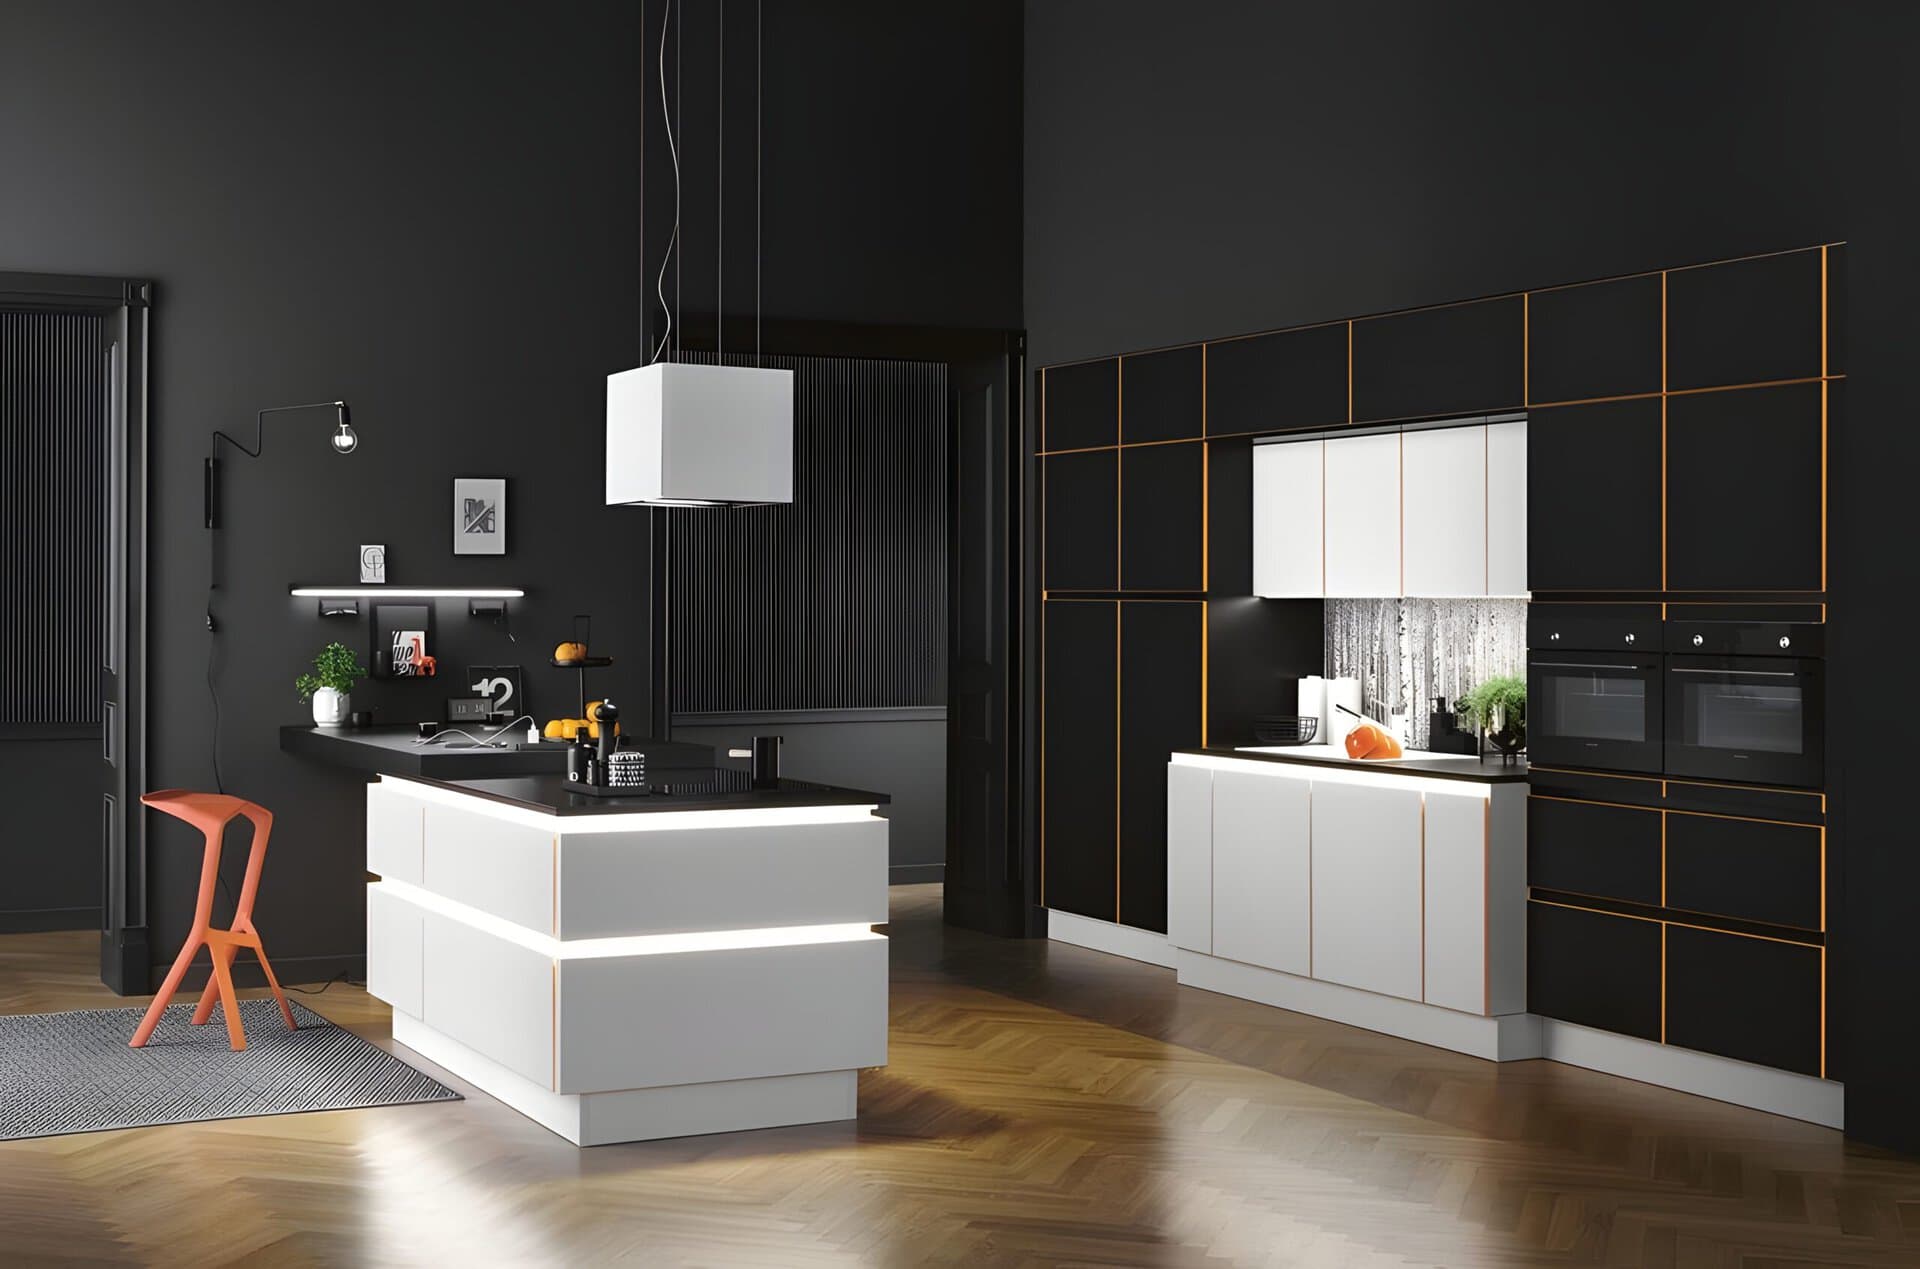 Modern kitchen with black and white color scheme, gold accents, and sleek German kitchen cabinets. Burger Lacquered laminate Series